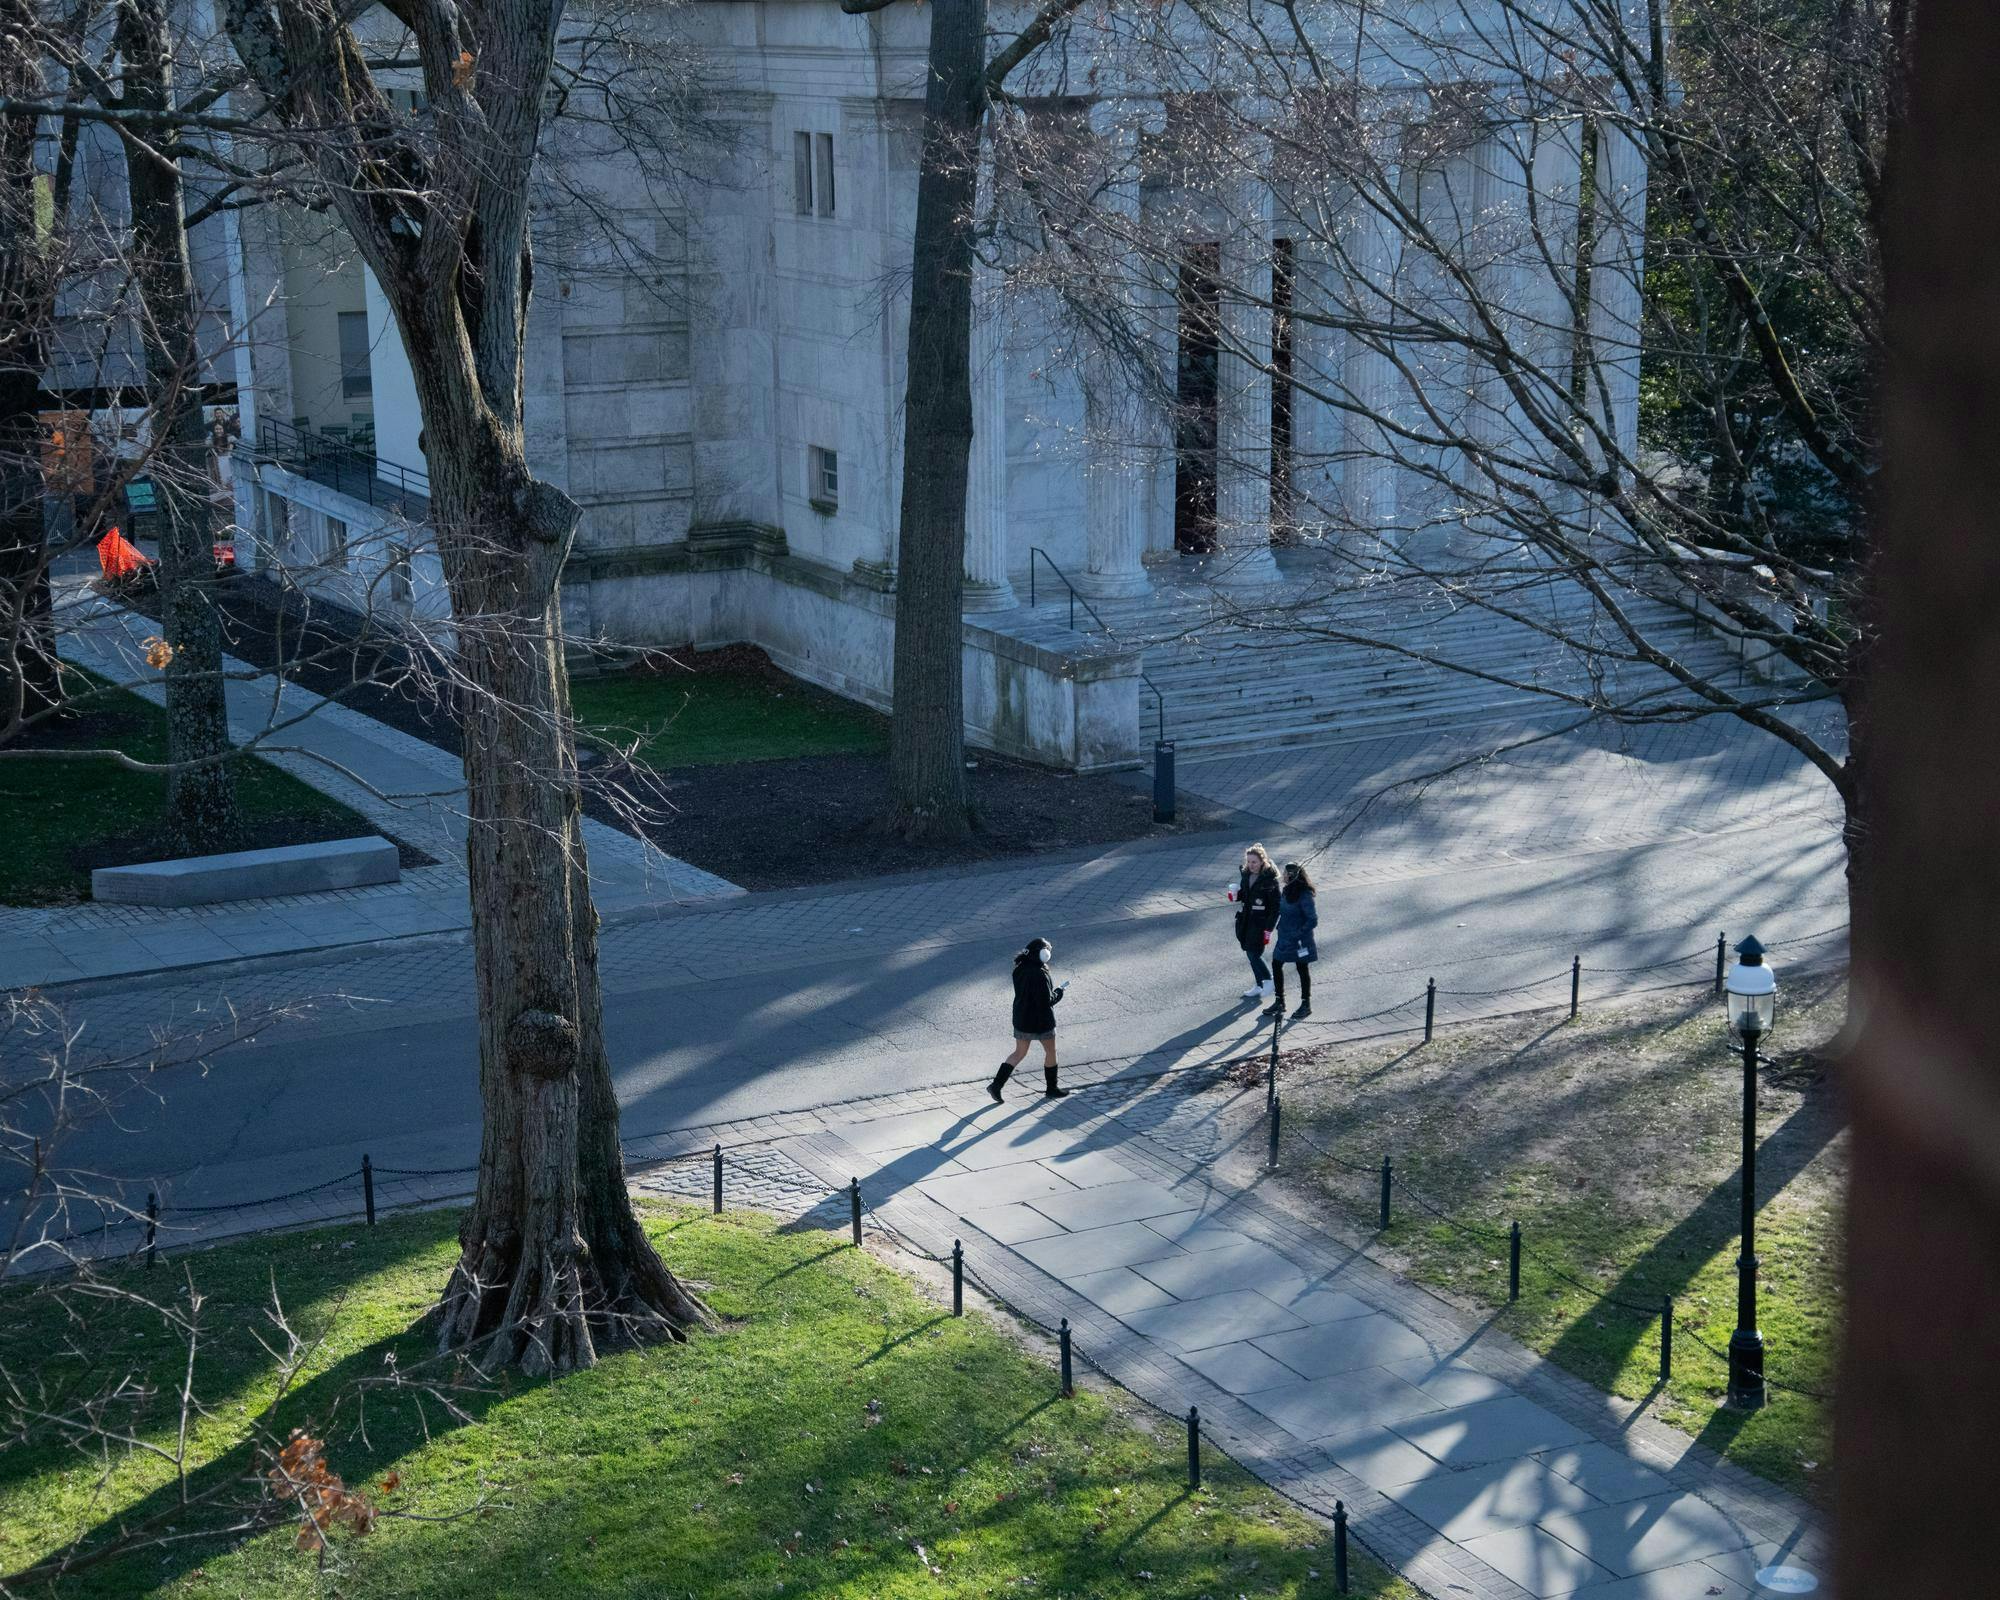 Students walking near white building with columns, surrounded by trees. Image taken from a high angle. 